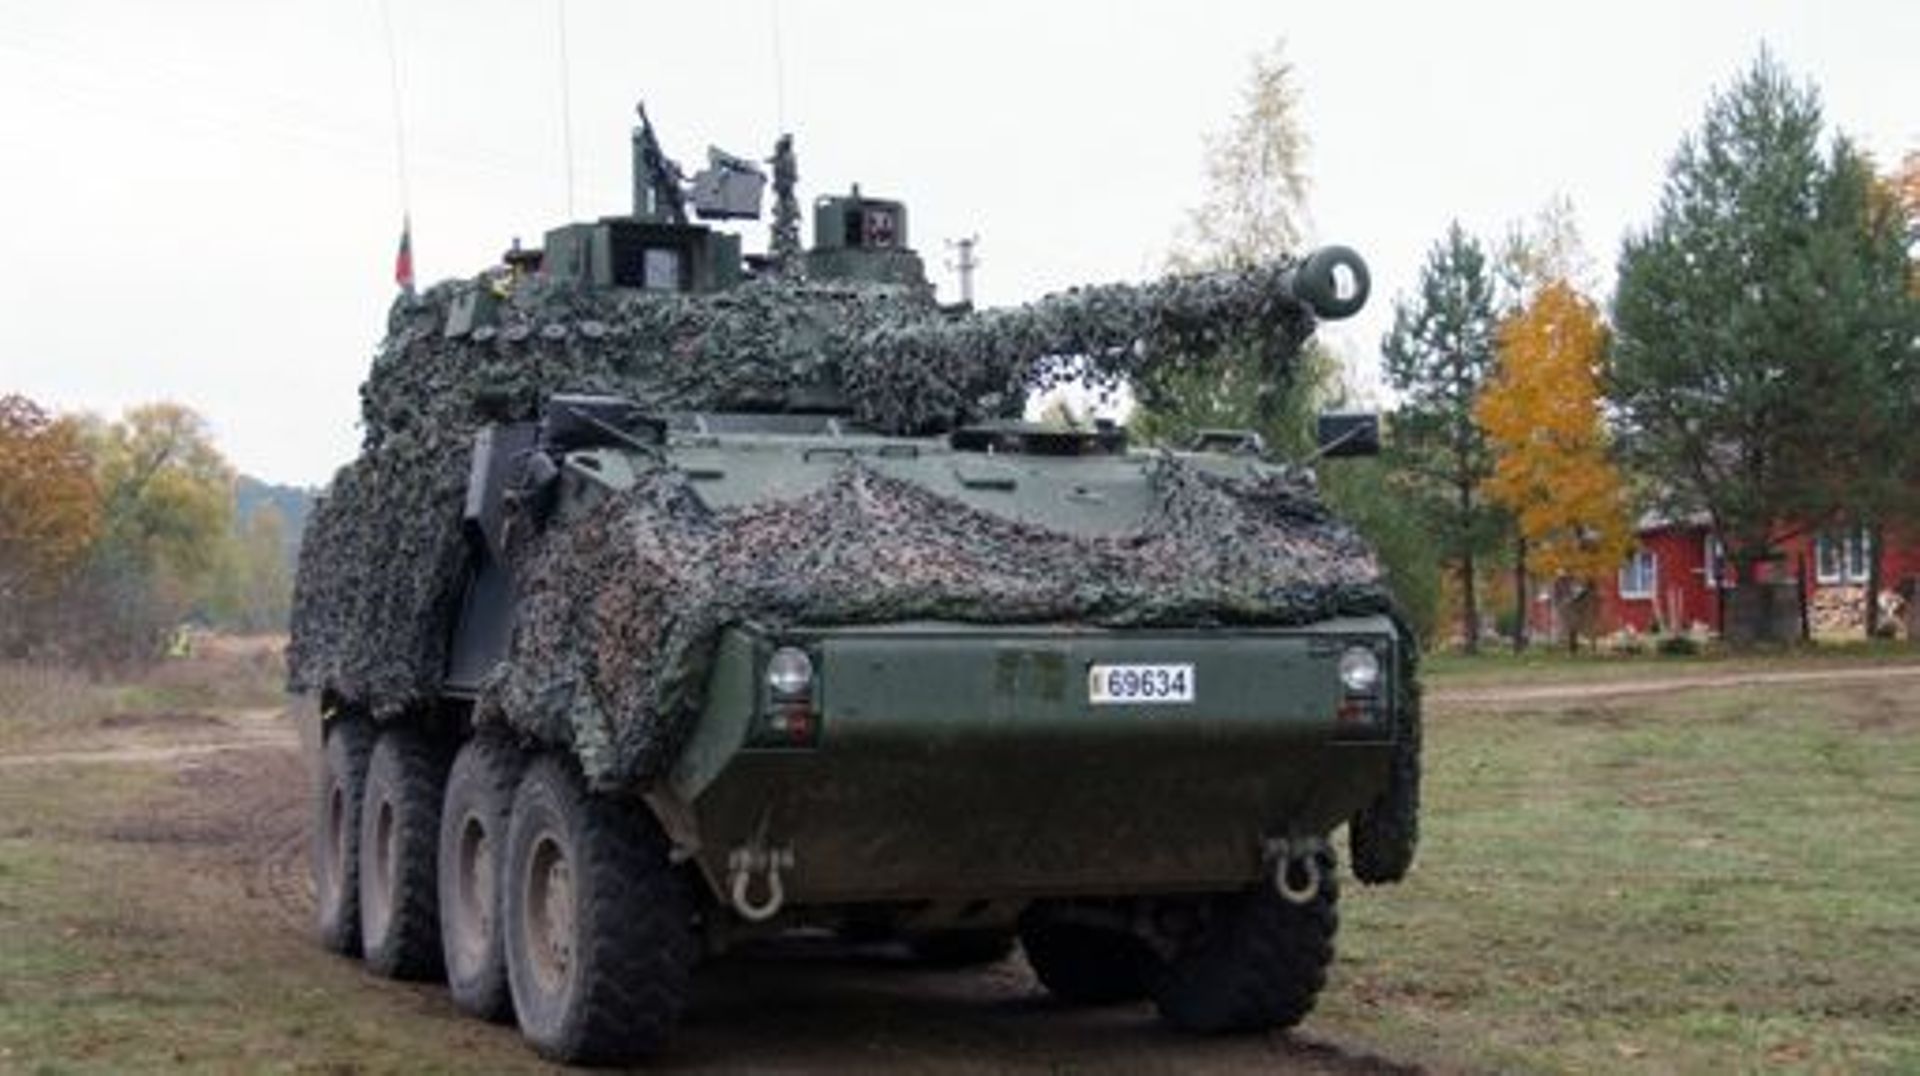 20151022 - KAUNAS, BELGIUM:  Piranha Armored Infantery Vehicle of Belgian defence in action near Kaunas, Lithuania during a two days visit at the NATO Baltic Piranha excercices in Lithuania, on Thursday 22 October 2015. BELGA PHOTO GERARD GAUDIN